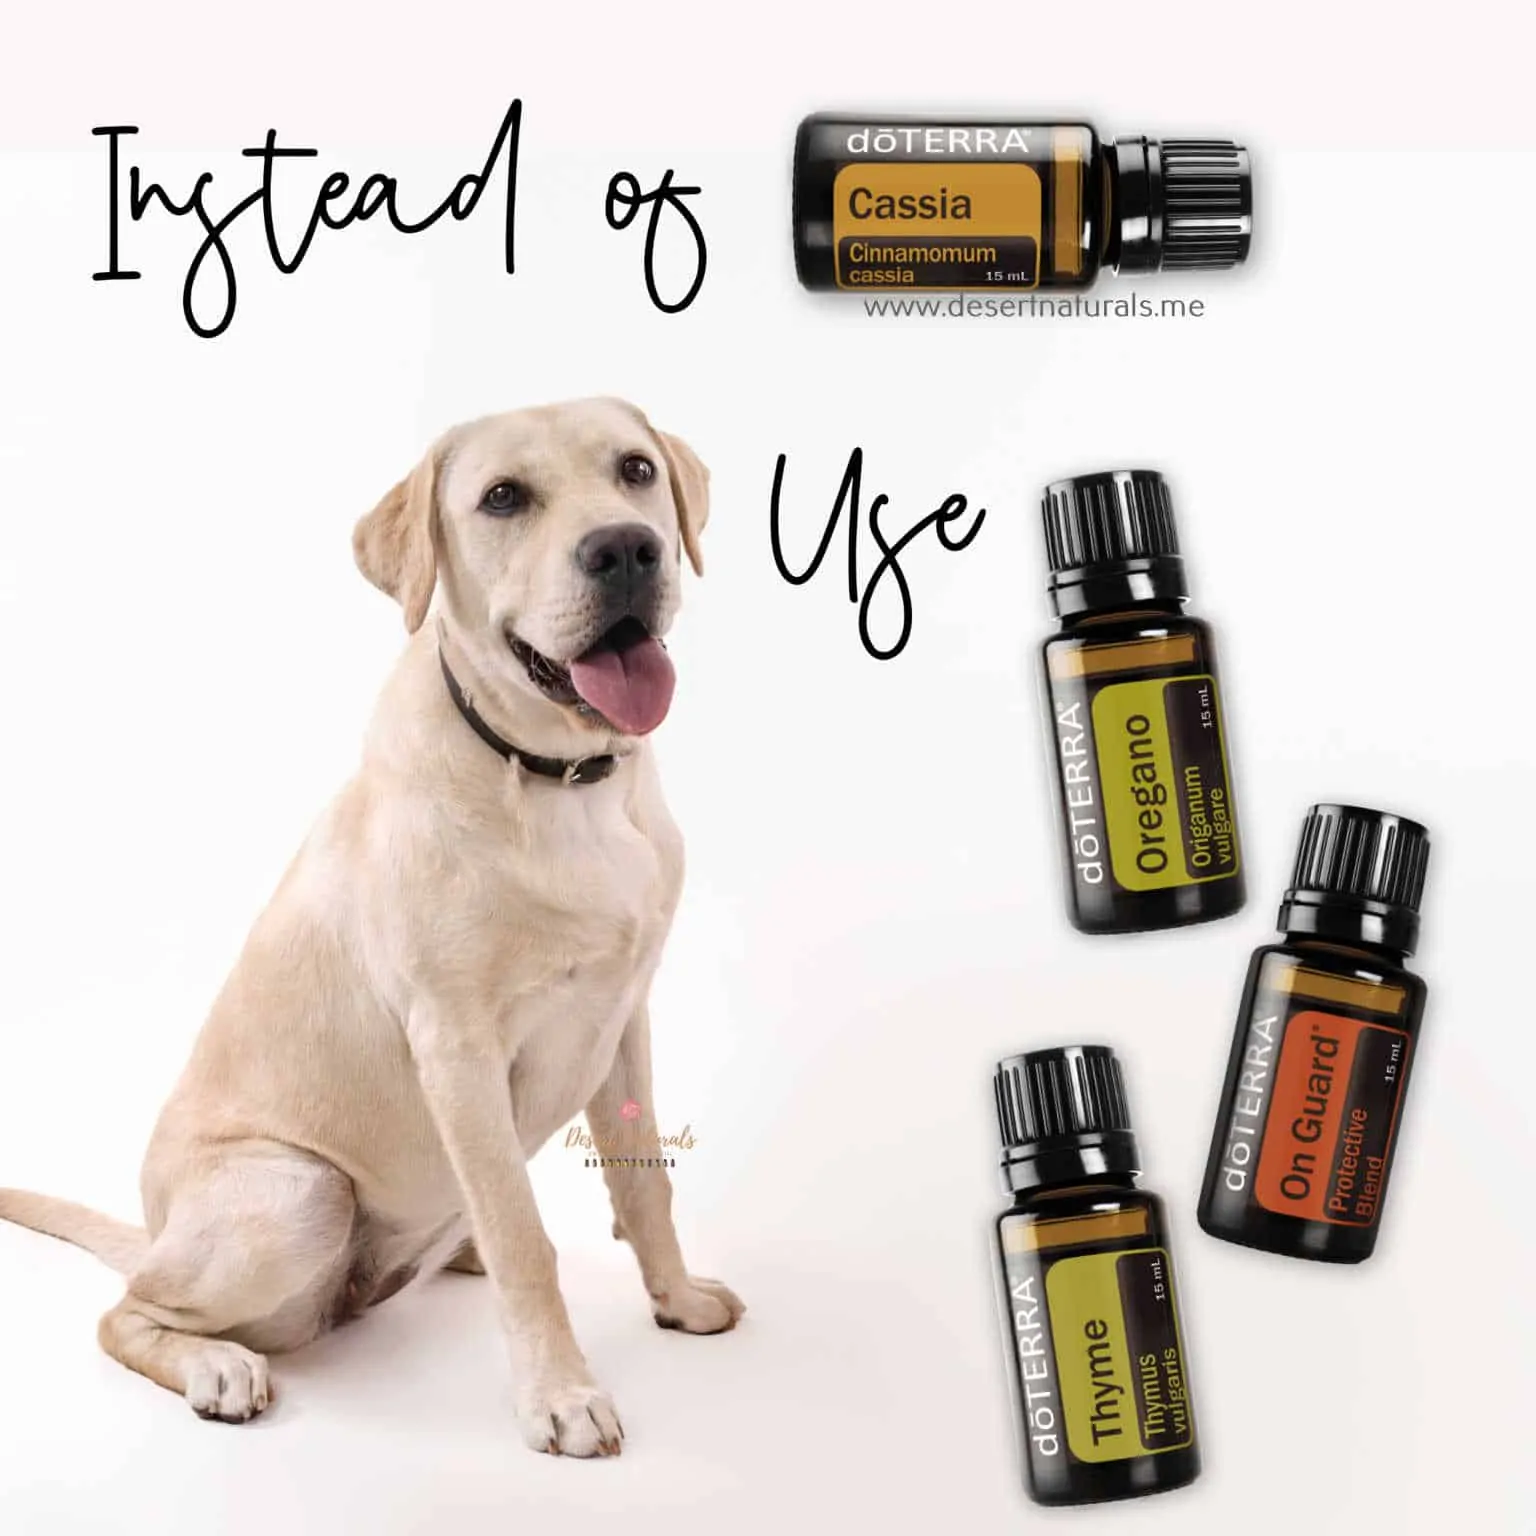 caasia is a hot oil and is not safe for dogs.  Use these essential oils instead